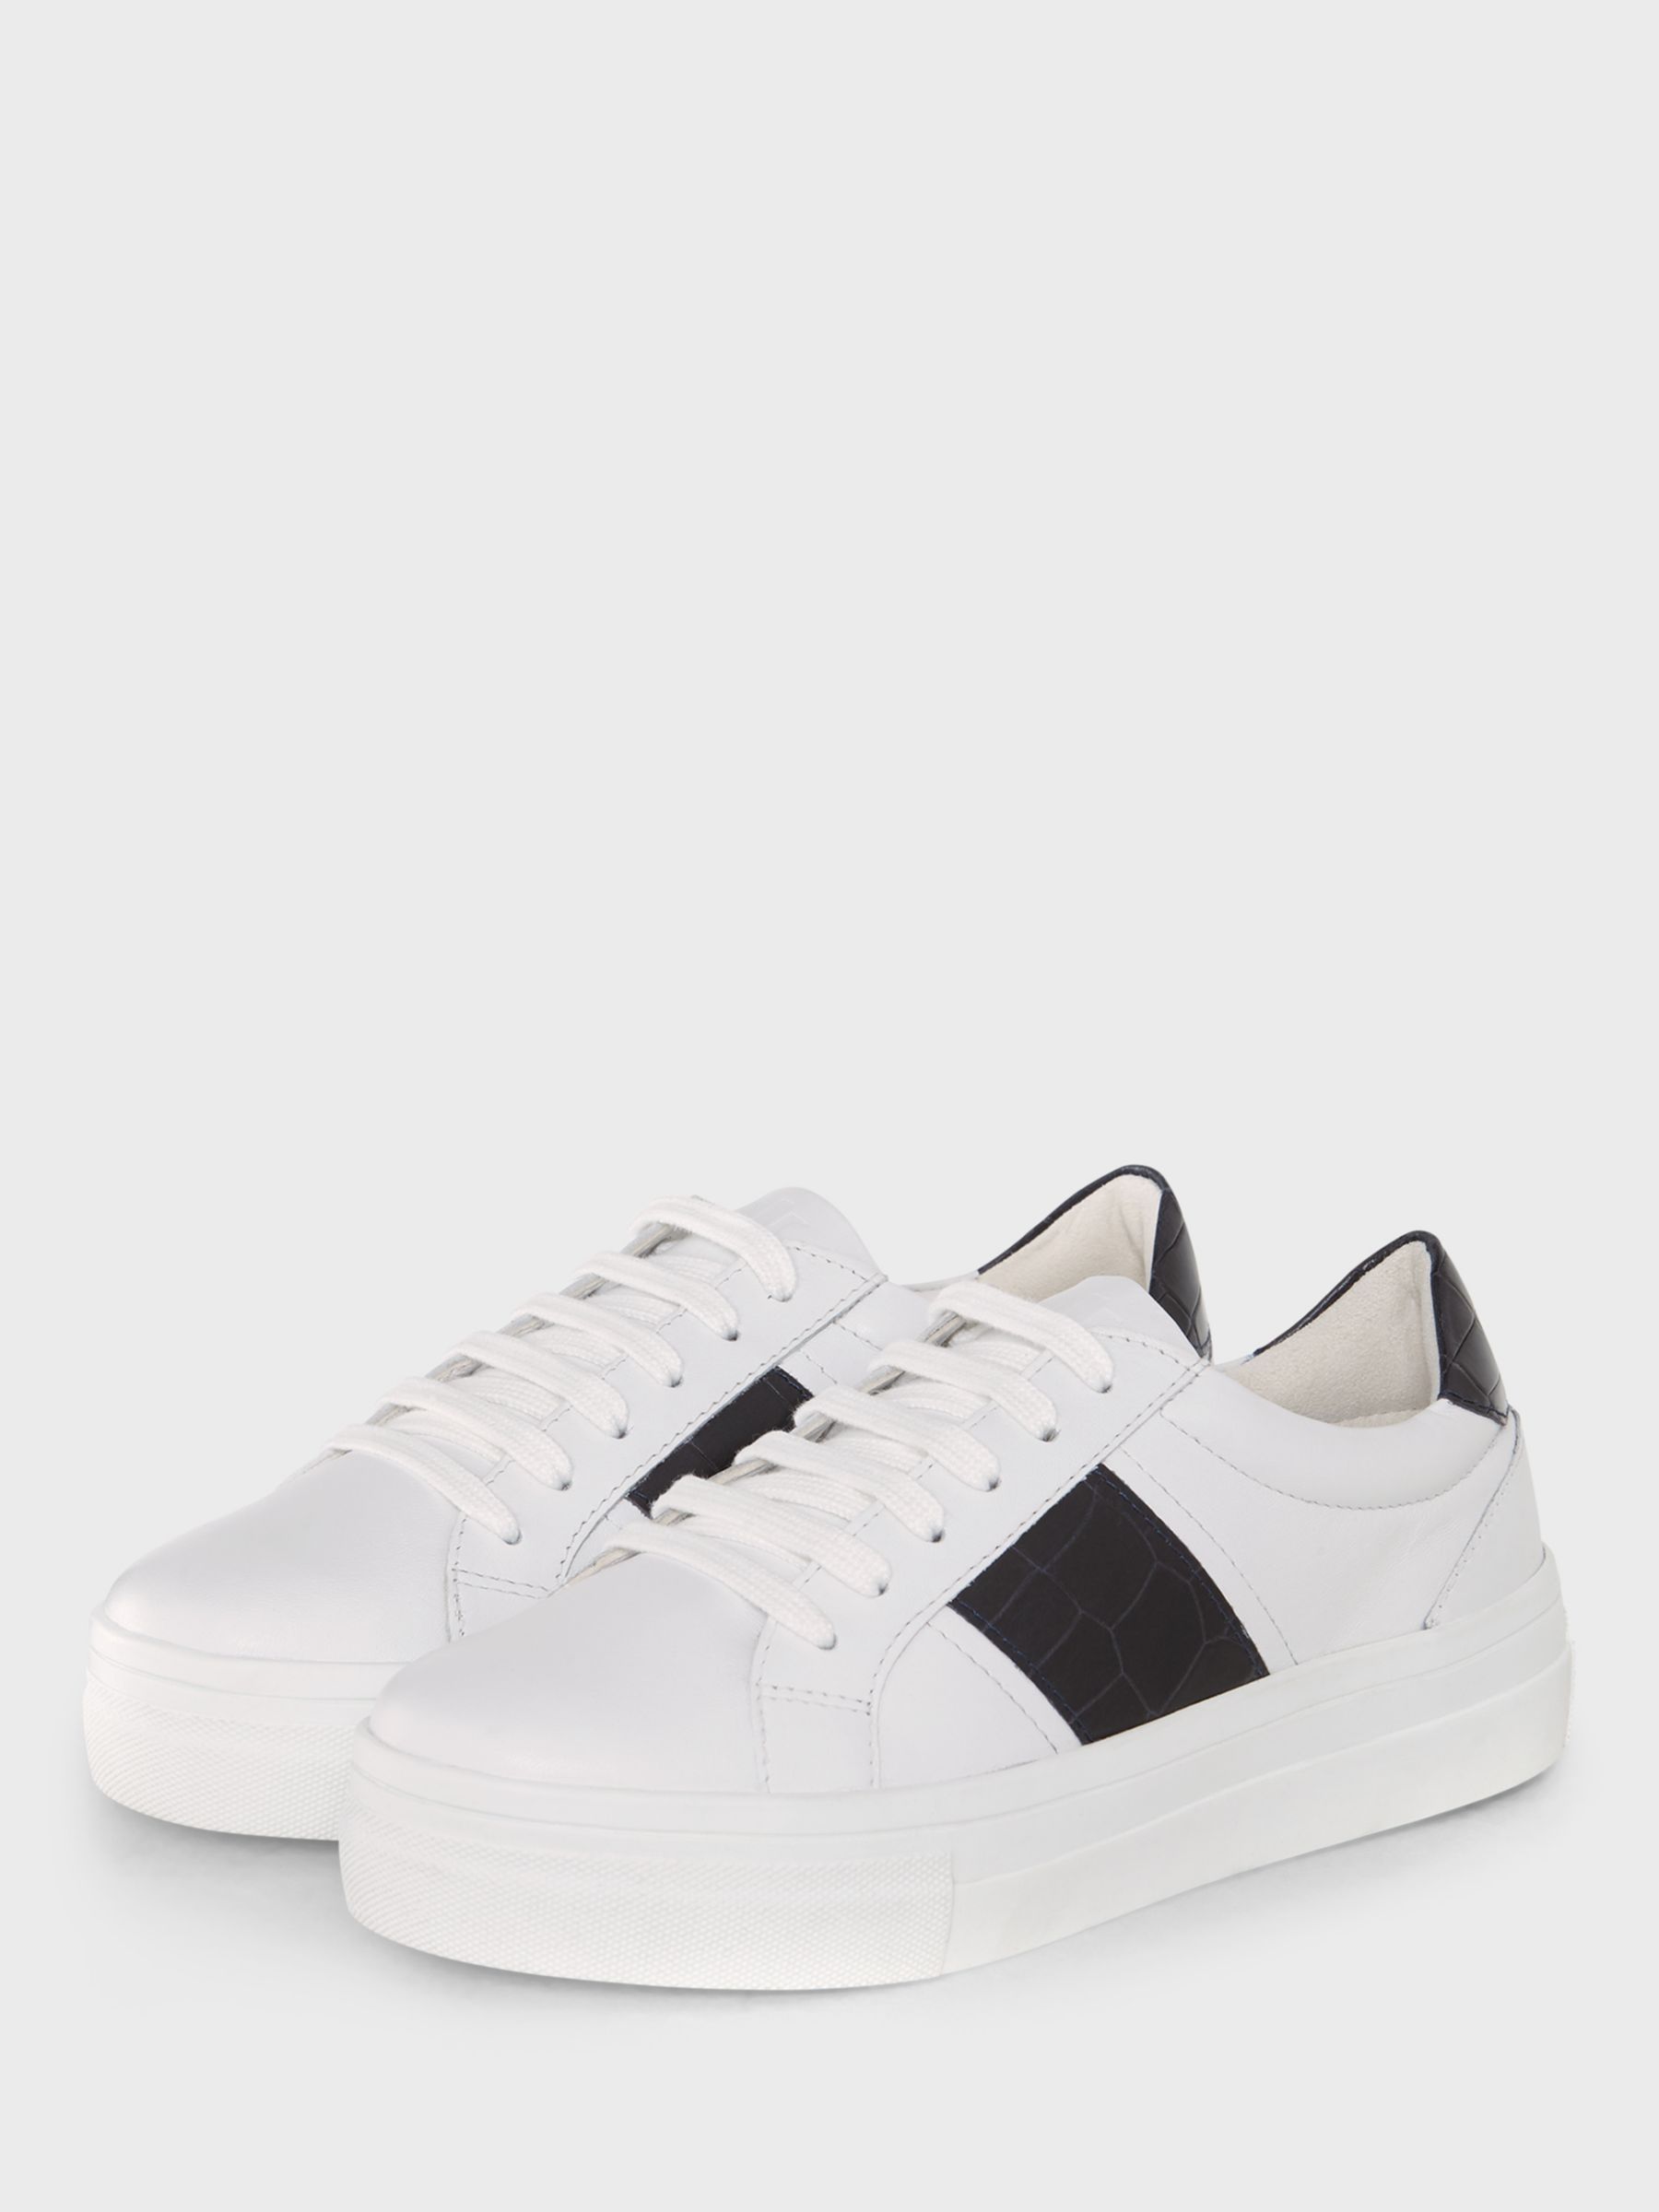 Hobbs Victoria Low Top Leather Trainers, White/Black, 3